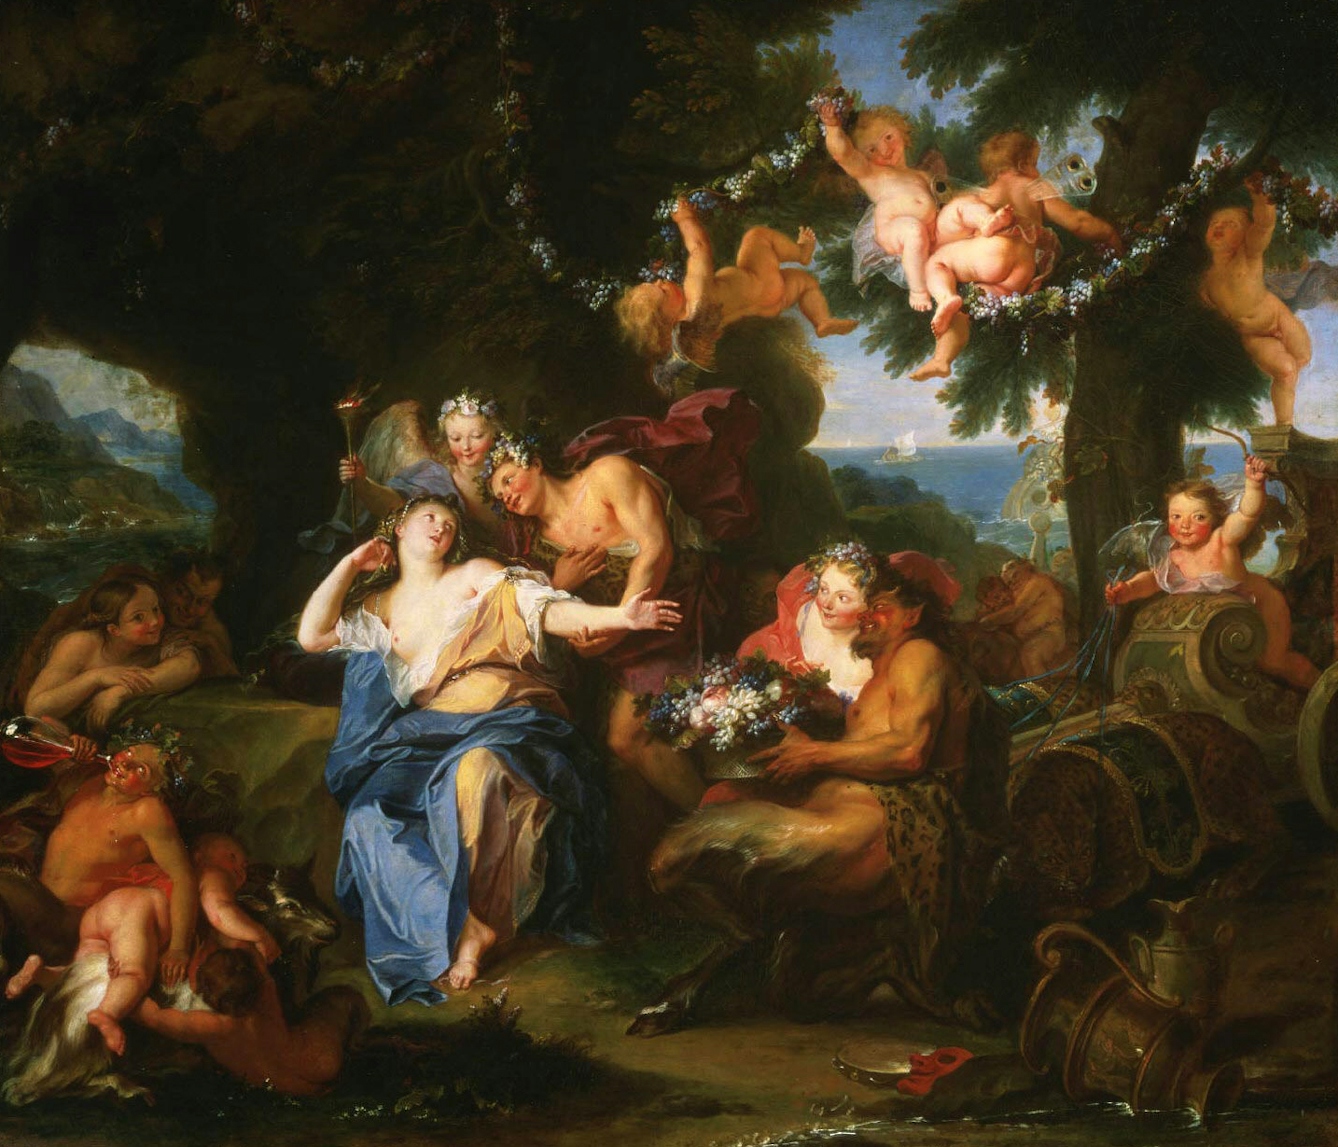 cherubs, satyrs and maidens in a scene called Bacchus and Ariadne on the Isle of Naxos by
Antoine Coypel, French, 1661 - 1722